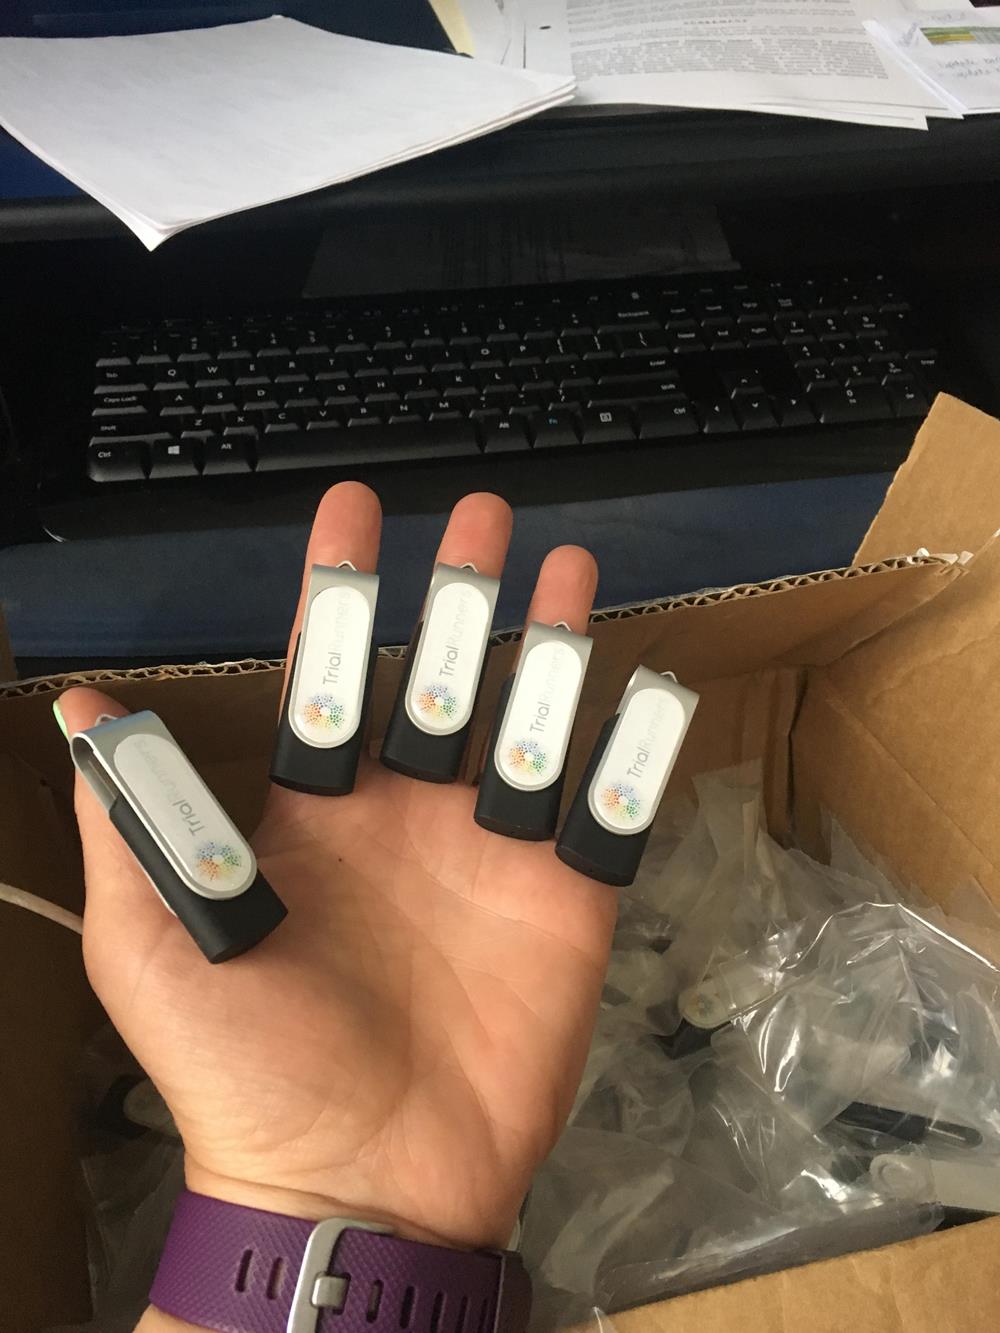 a hand holding several usb drives